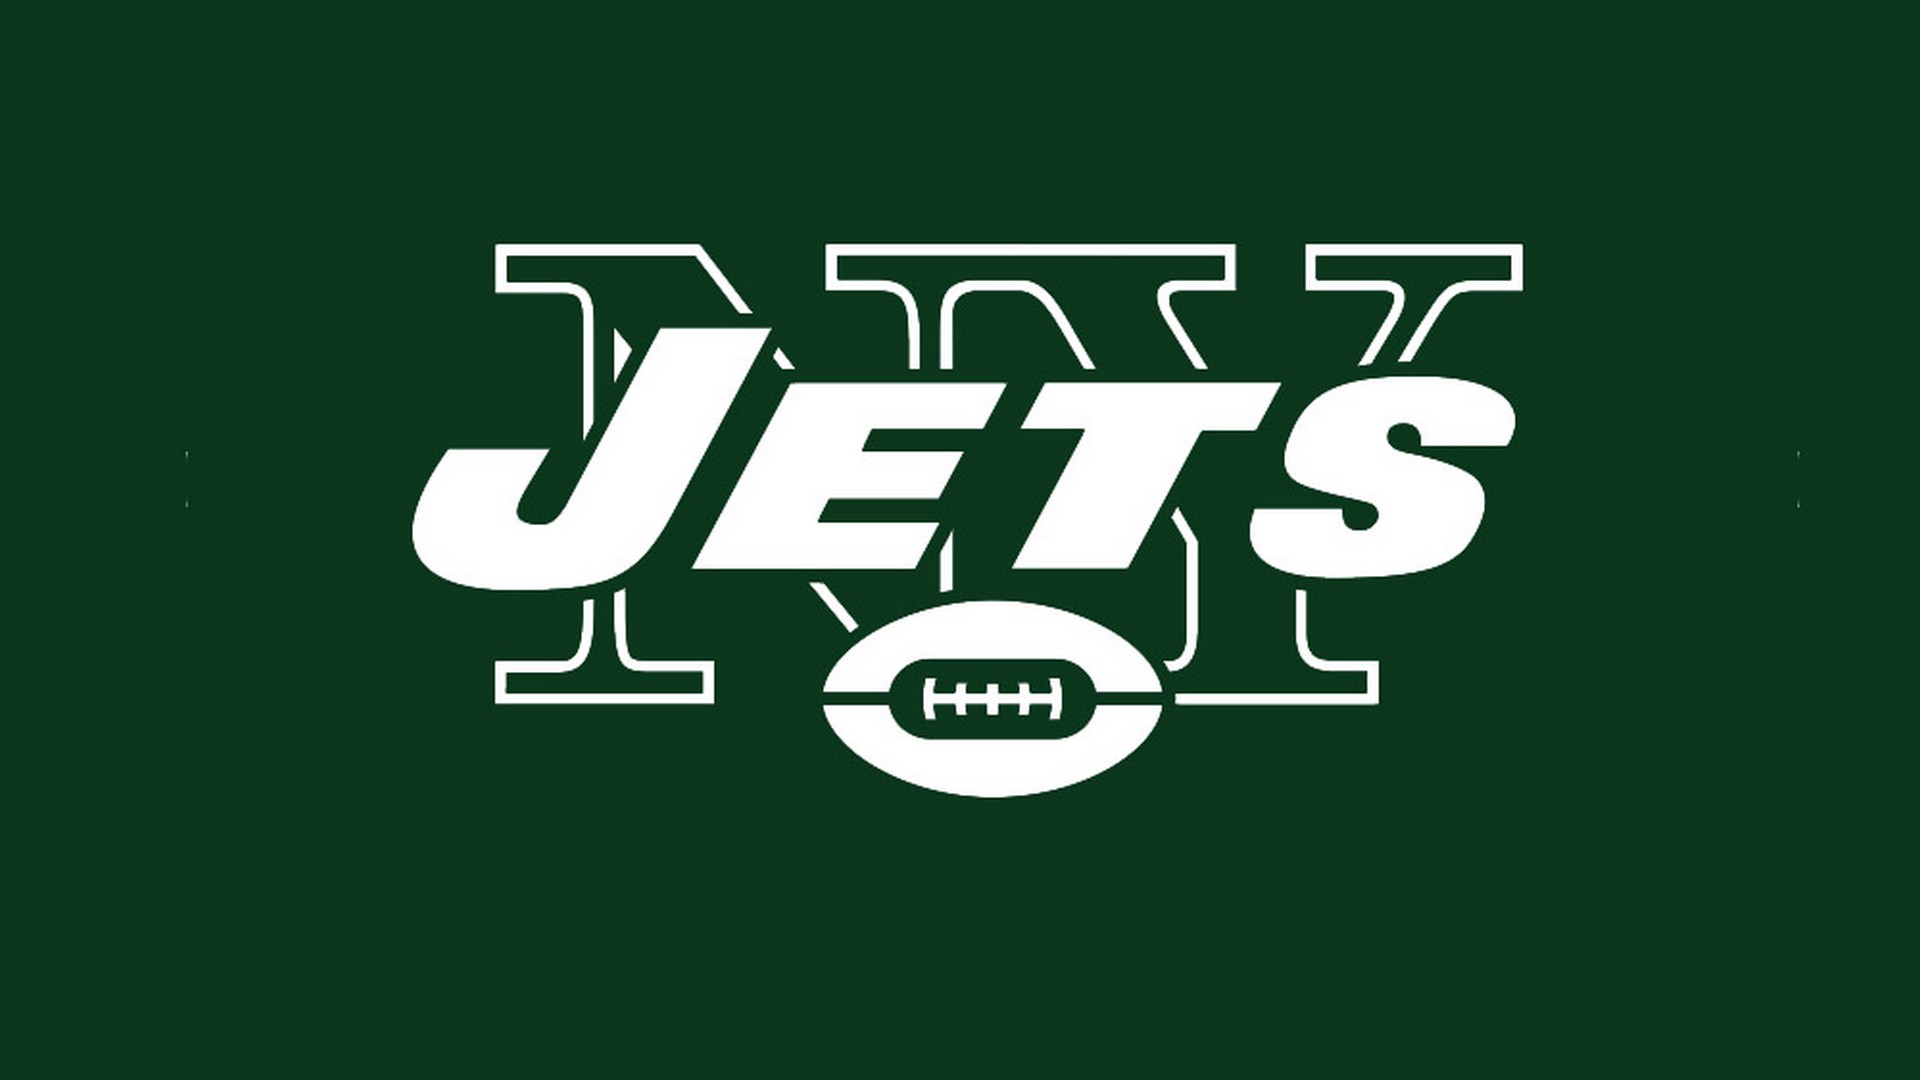 HD Desktop Wallpaper New York Jets with resolution 1920x1080 pixel. You can make this wallpaper for your Mac or Windows Desktop Background, iPhone, Android or Tablet and another Smartphone device